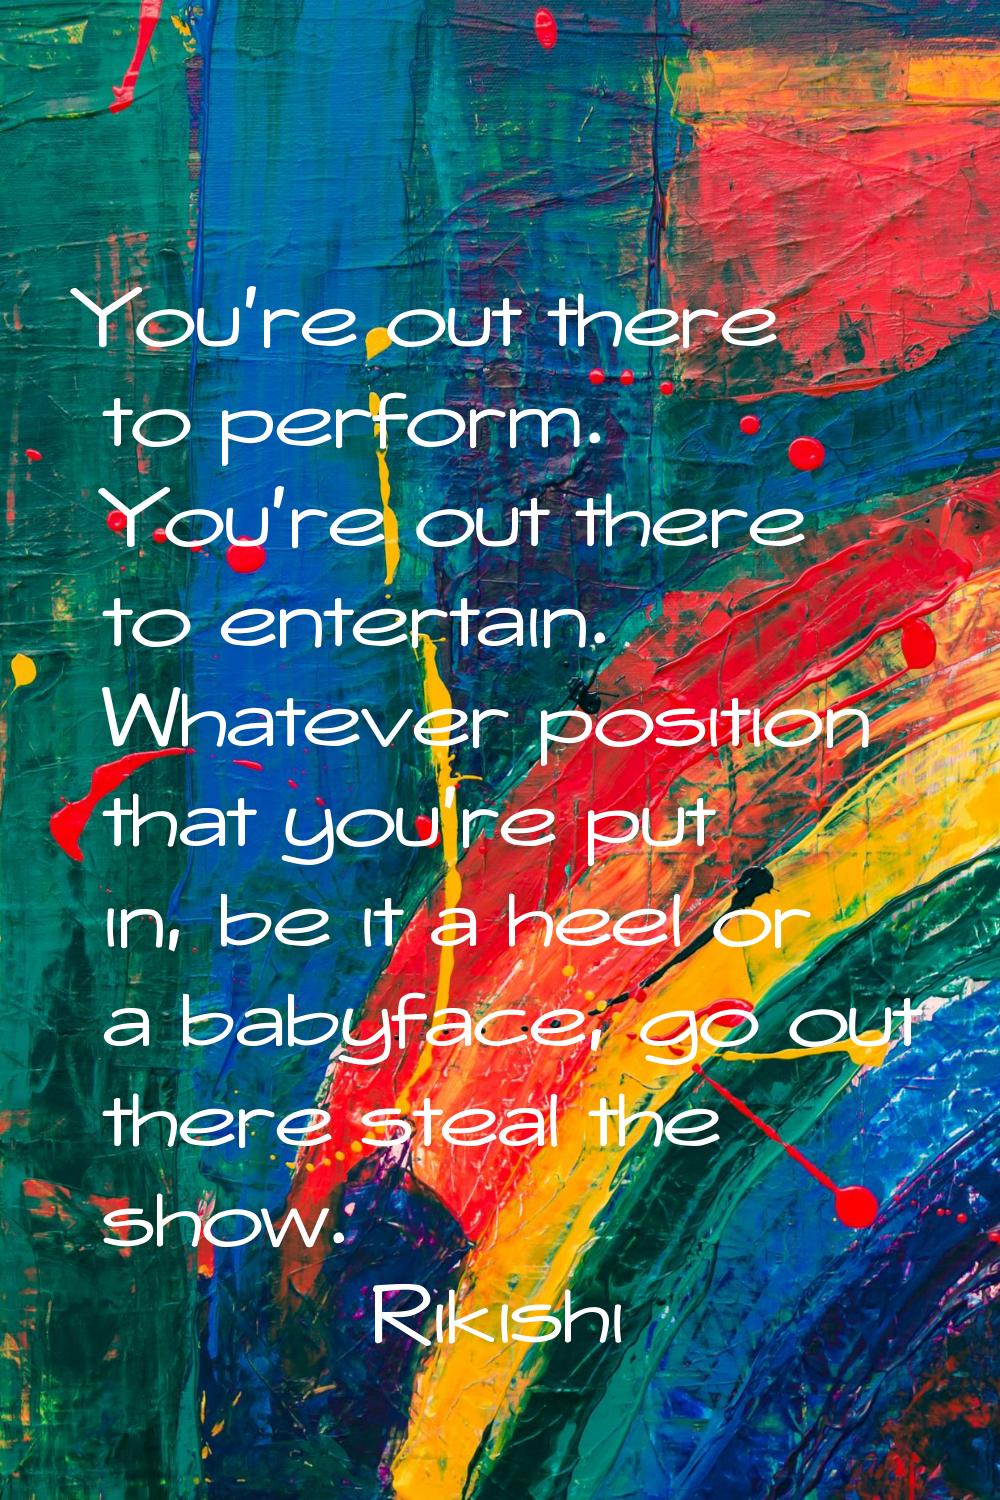 You're out there to perform. You're out there to entertain. Whatever position that you're put in, b